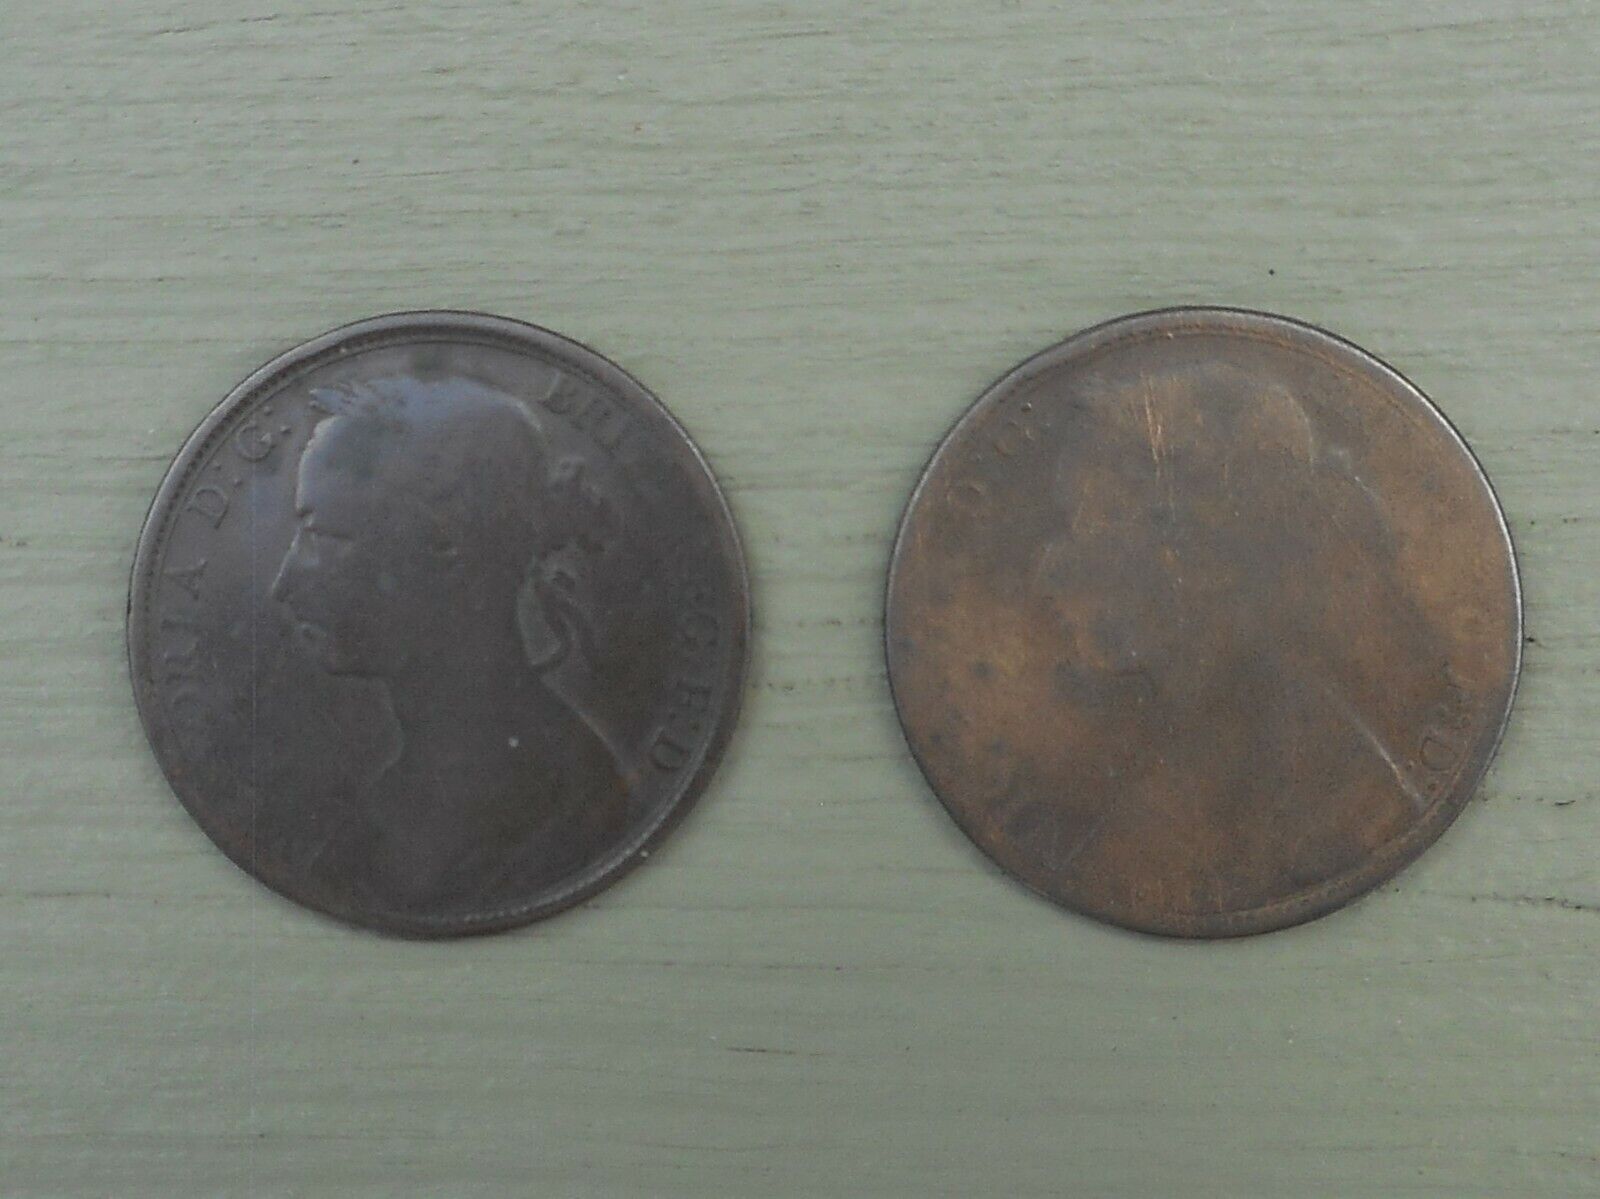 1877 & 1890 LOT OF 2 COINS BRITAIN One Penny 1 Pence Cent Queen Victoria Без бренда - фотография #5